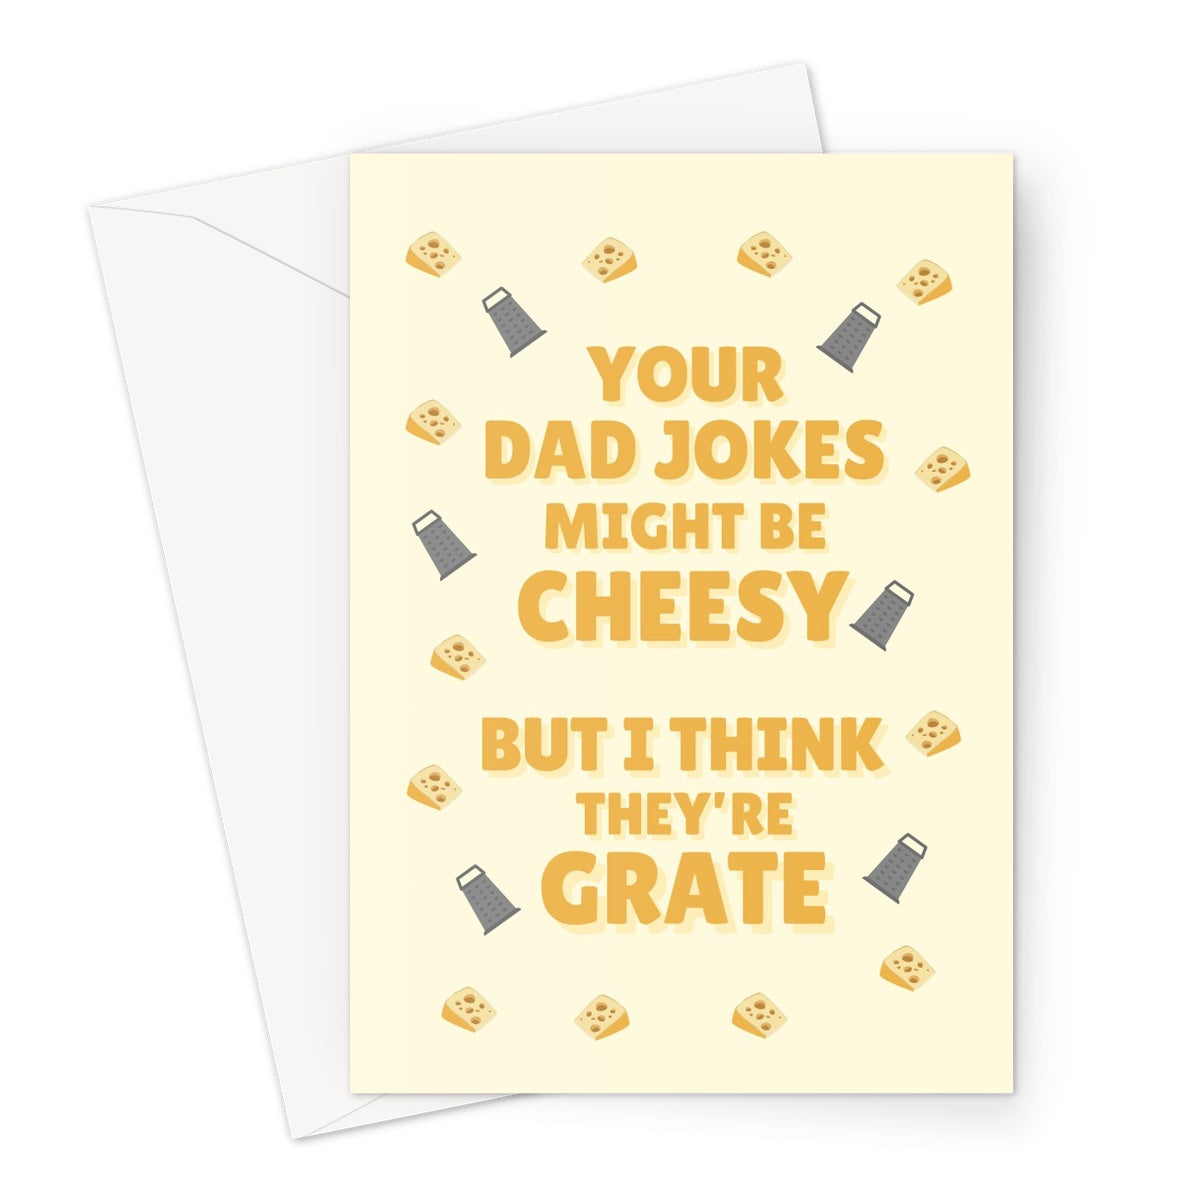 Your Dad Jokes Might Be Cheesy But I Think They're Grate Funny Pun Father's Day Birthday Cheese Greeting Card